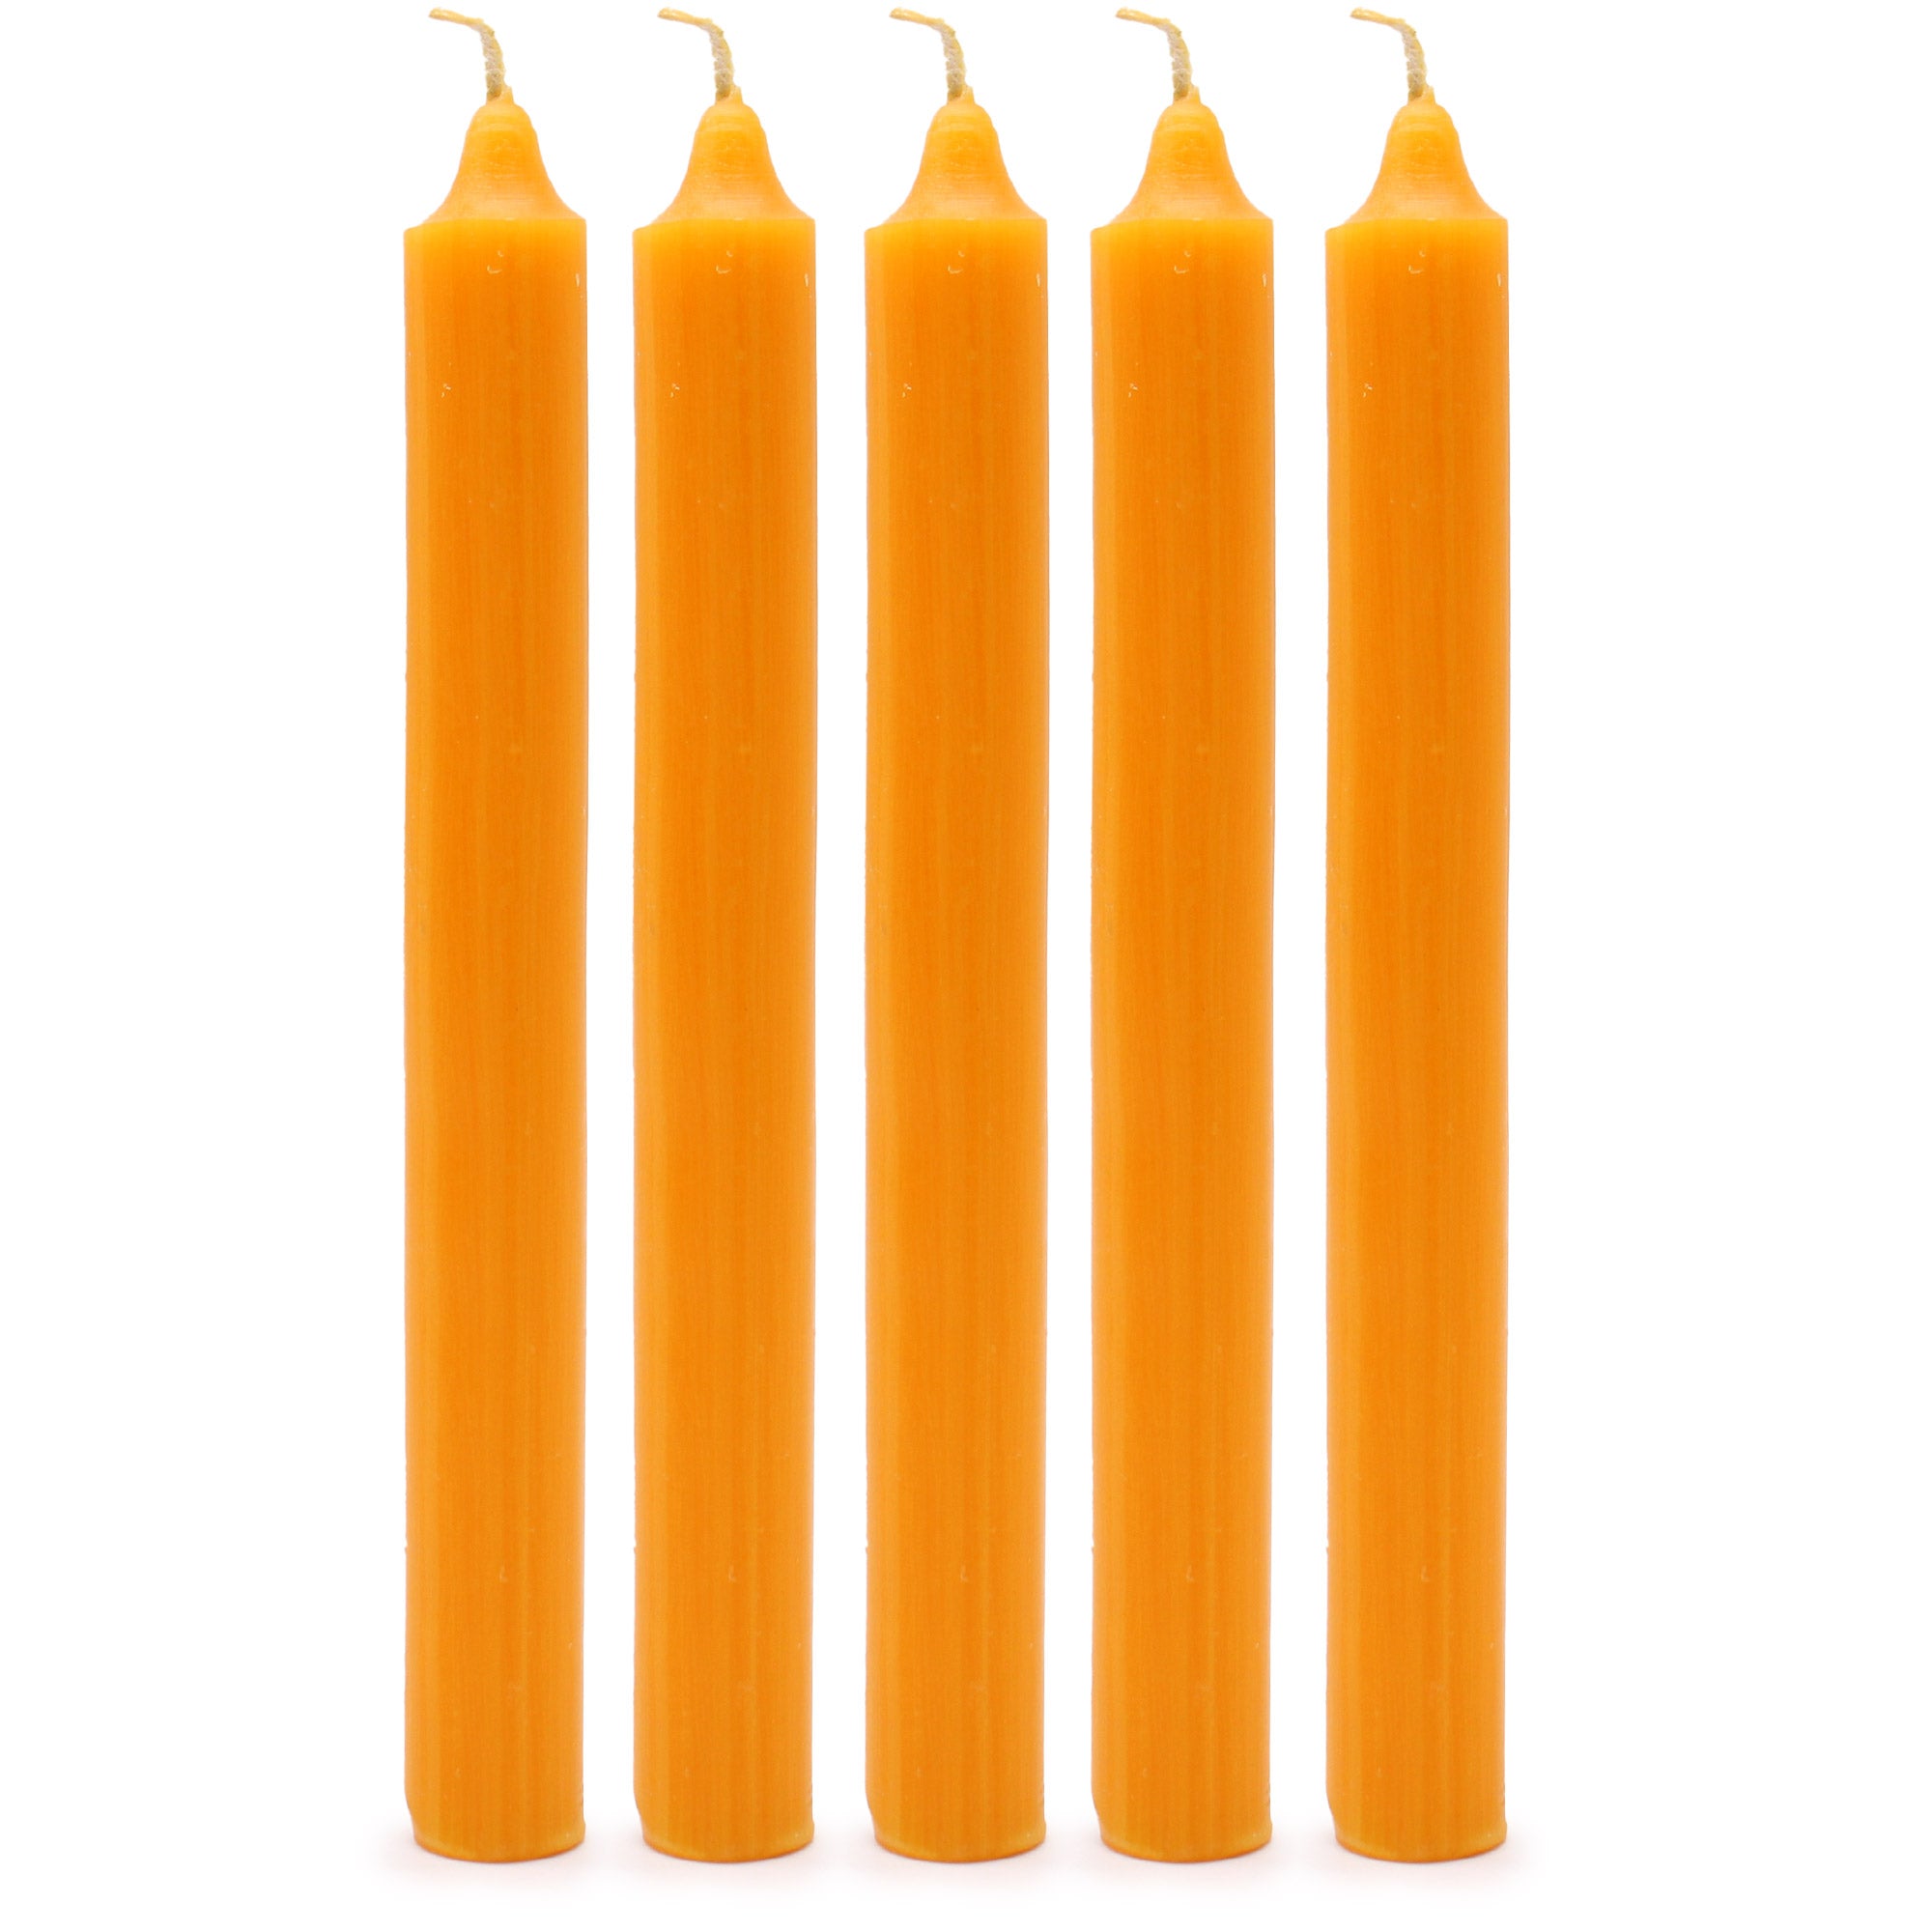 Solid Colour Dinner Candles - Rustic Mango - Pack of 5